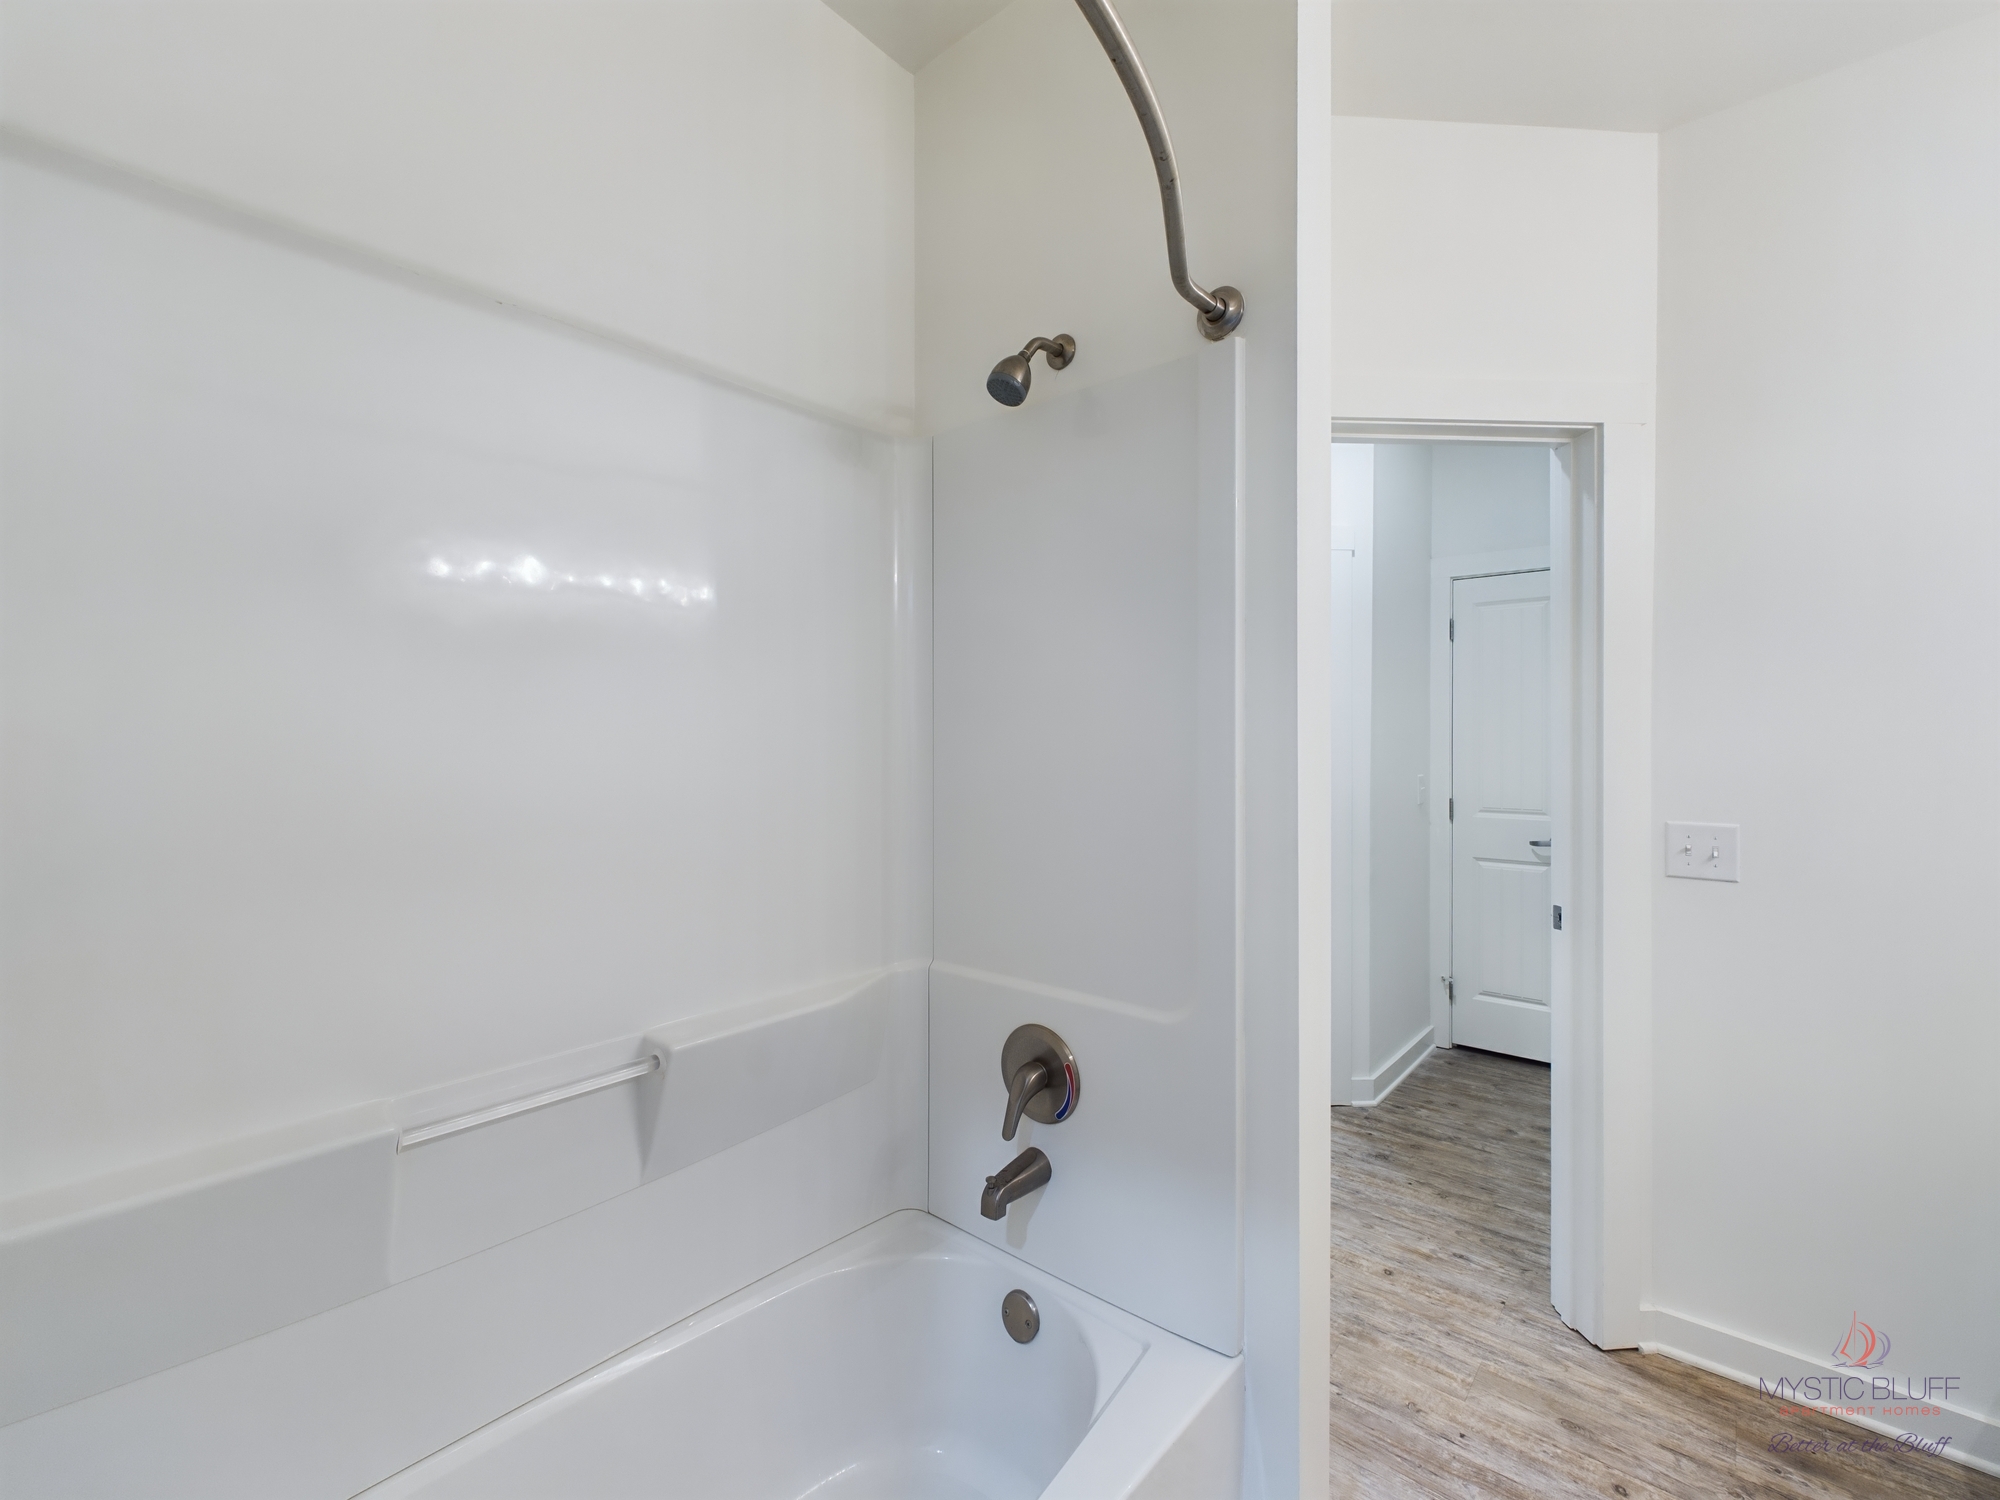 A white bathroom in an apartment with a tub and shower.